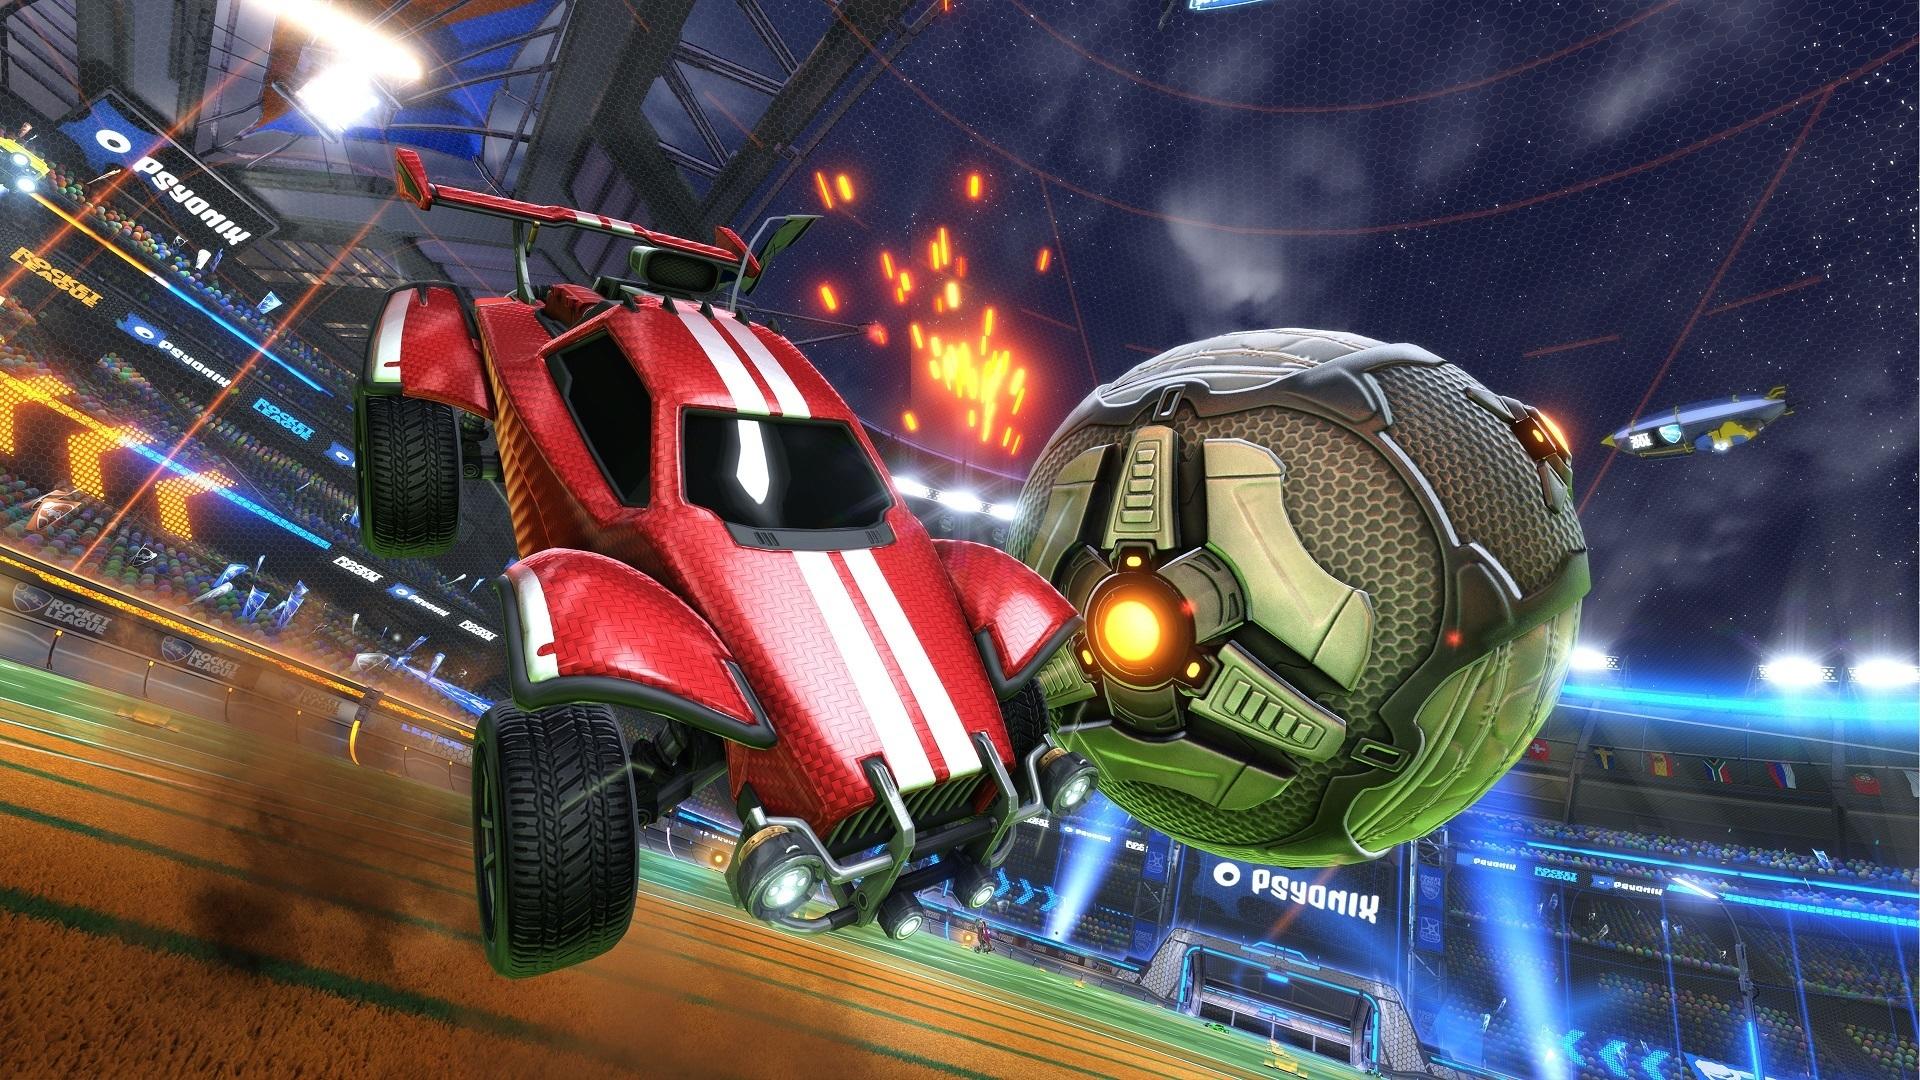 Why Rocket League’s quick chat mechanic is so demoralizing | The Loadout